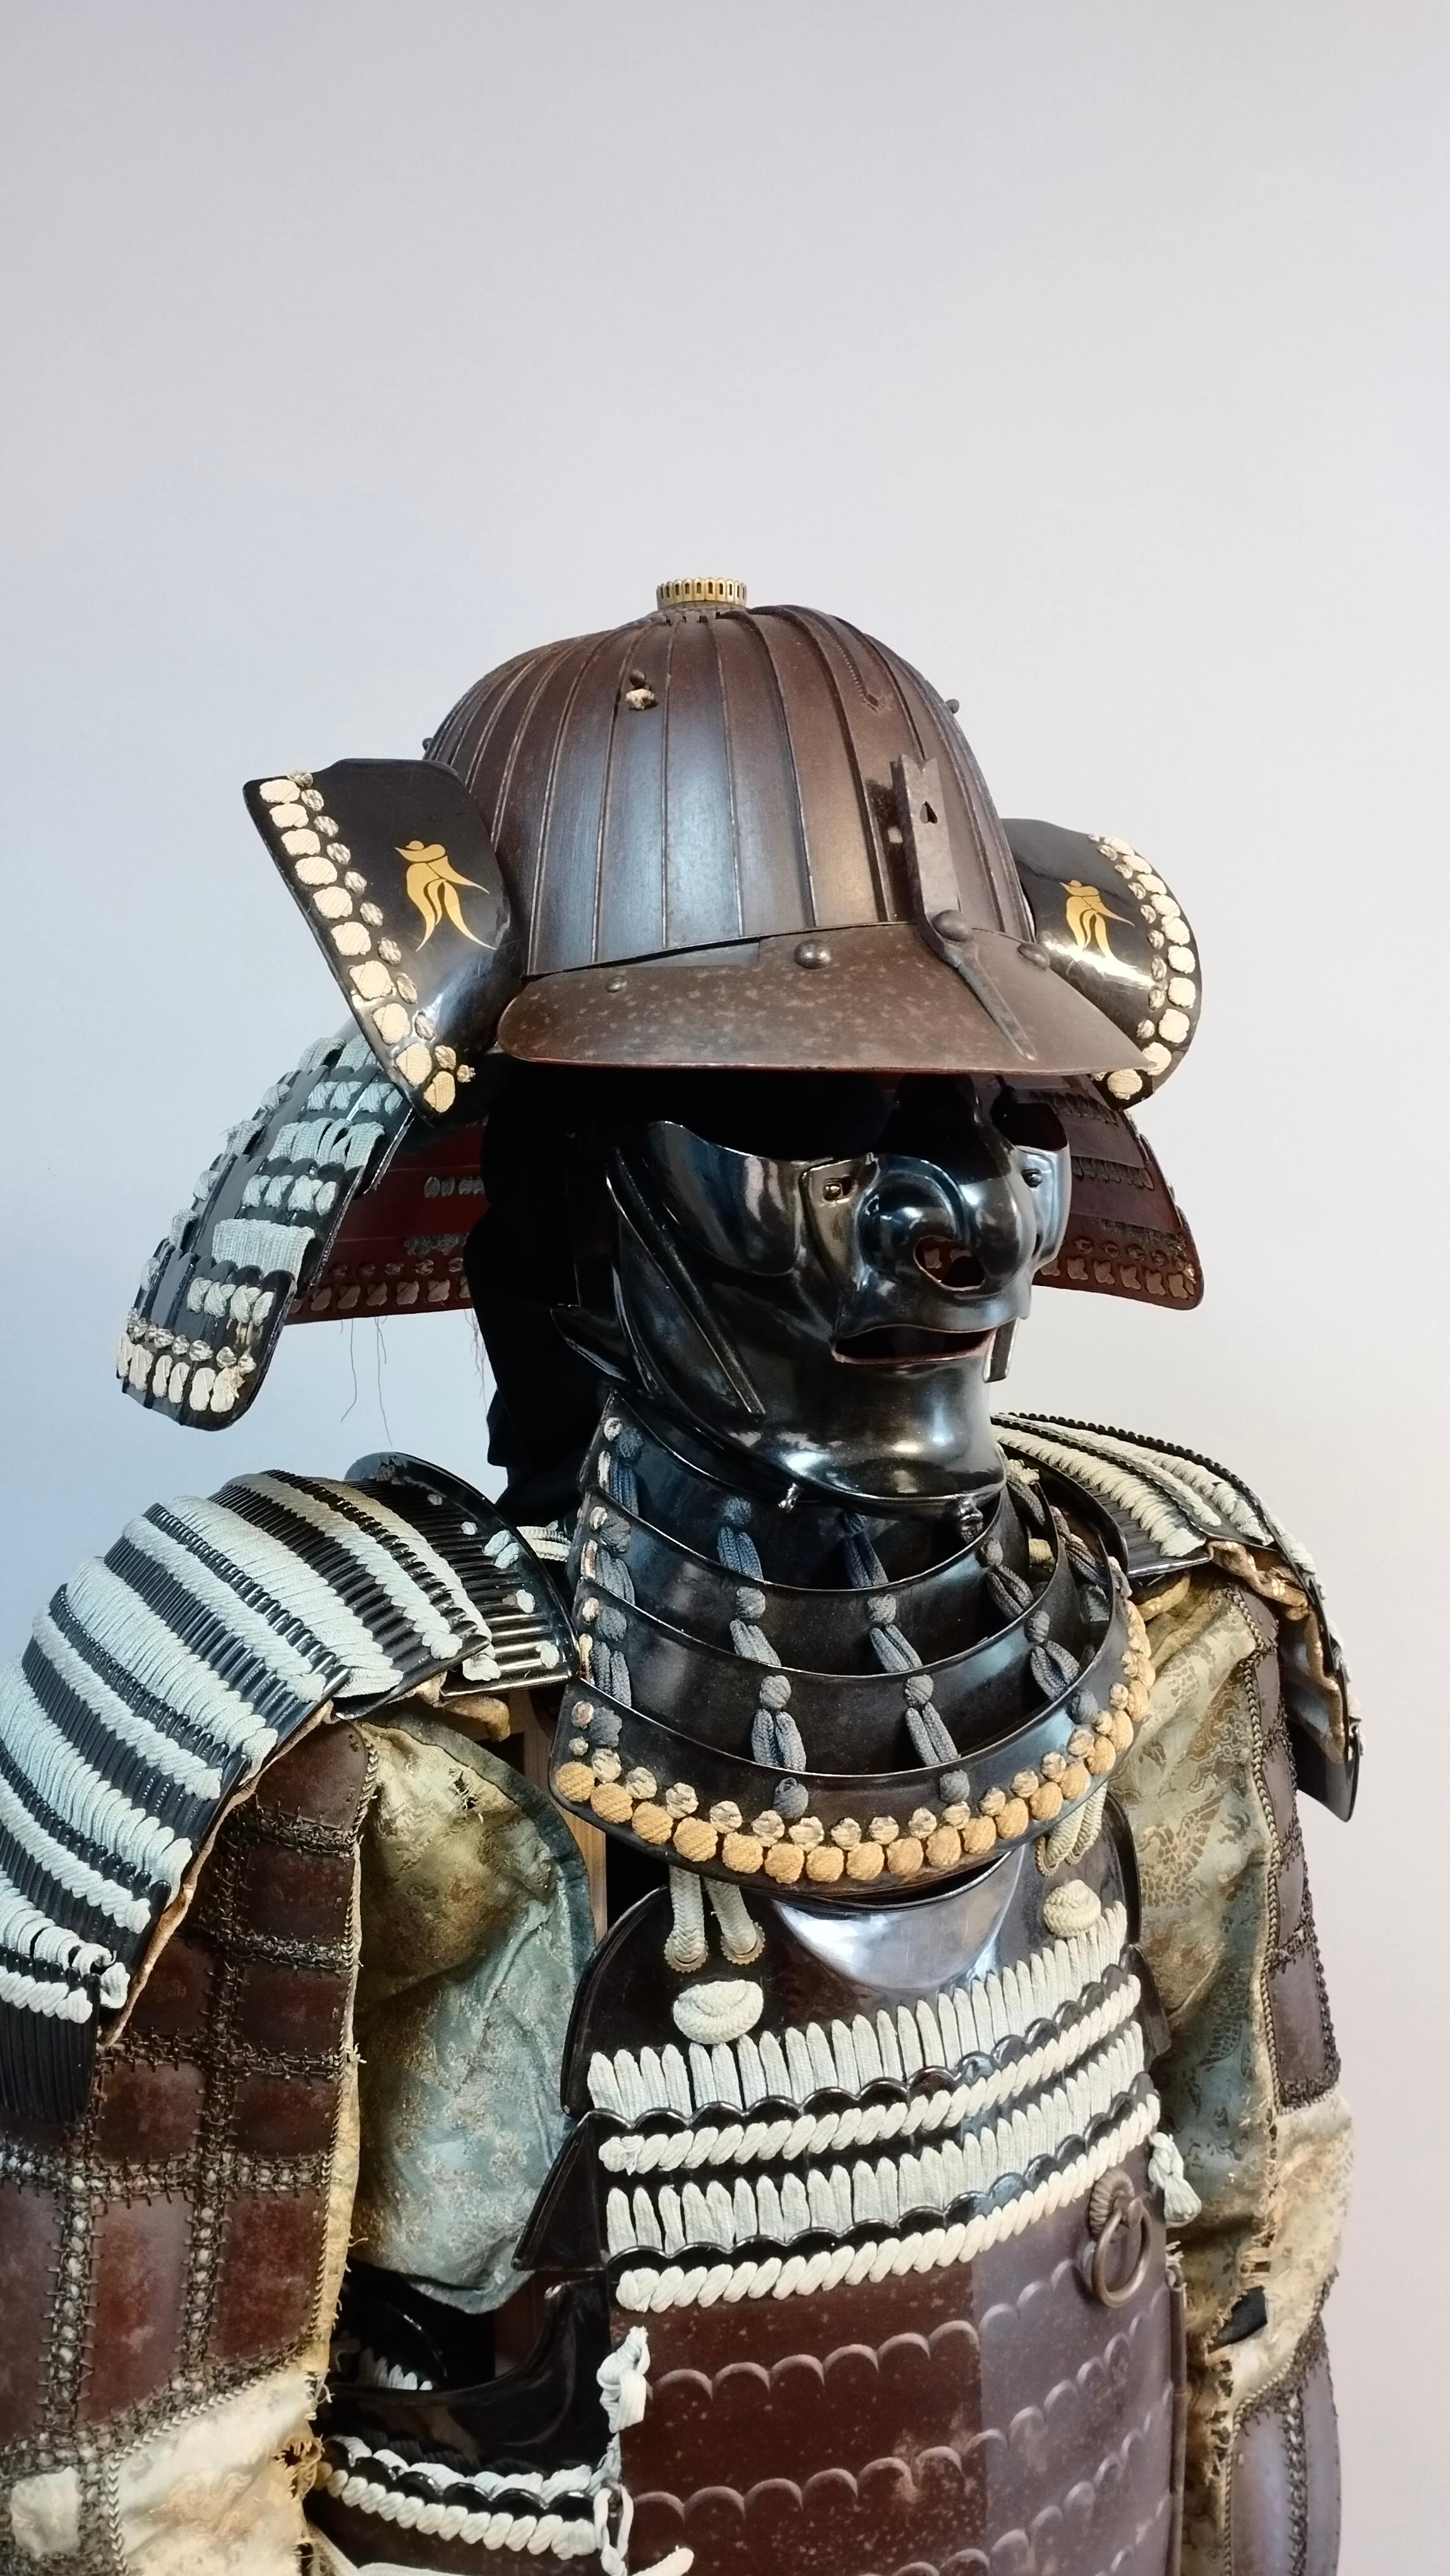 This is a truly exceptional set of 18th century Samurai armor that is sure to impress any collector or enthusiast. The patinated iron used in its construction has aged beautifully, giving the armor a truly unique appearance that is sure to catch the